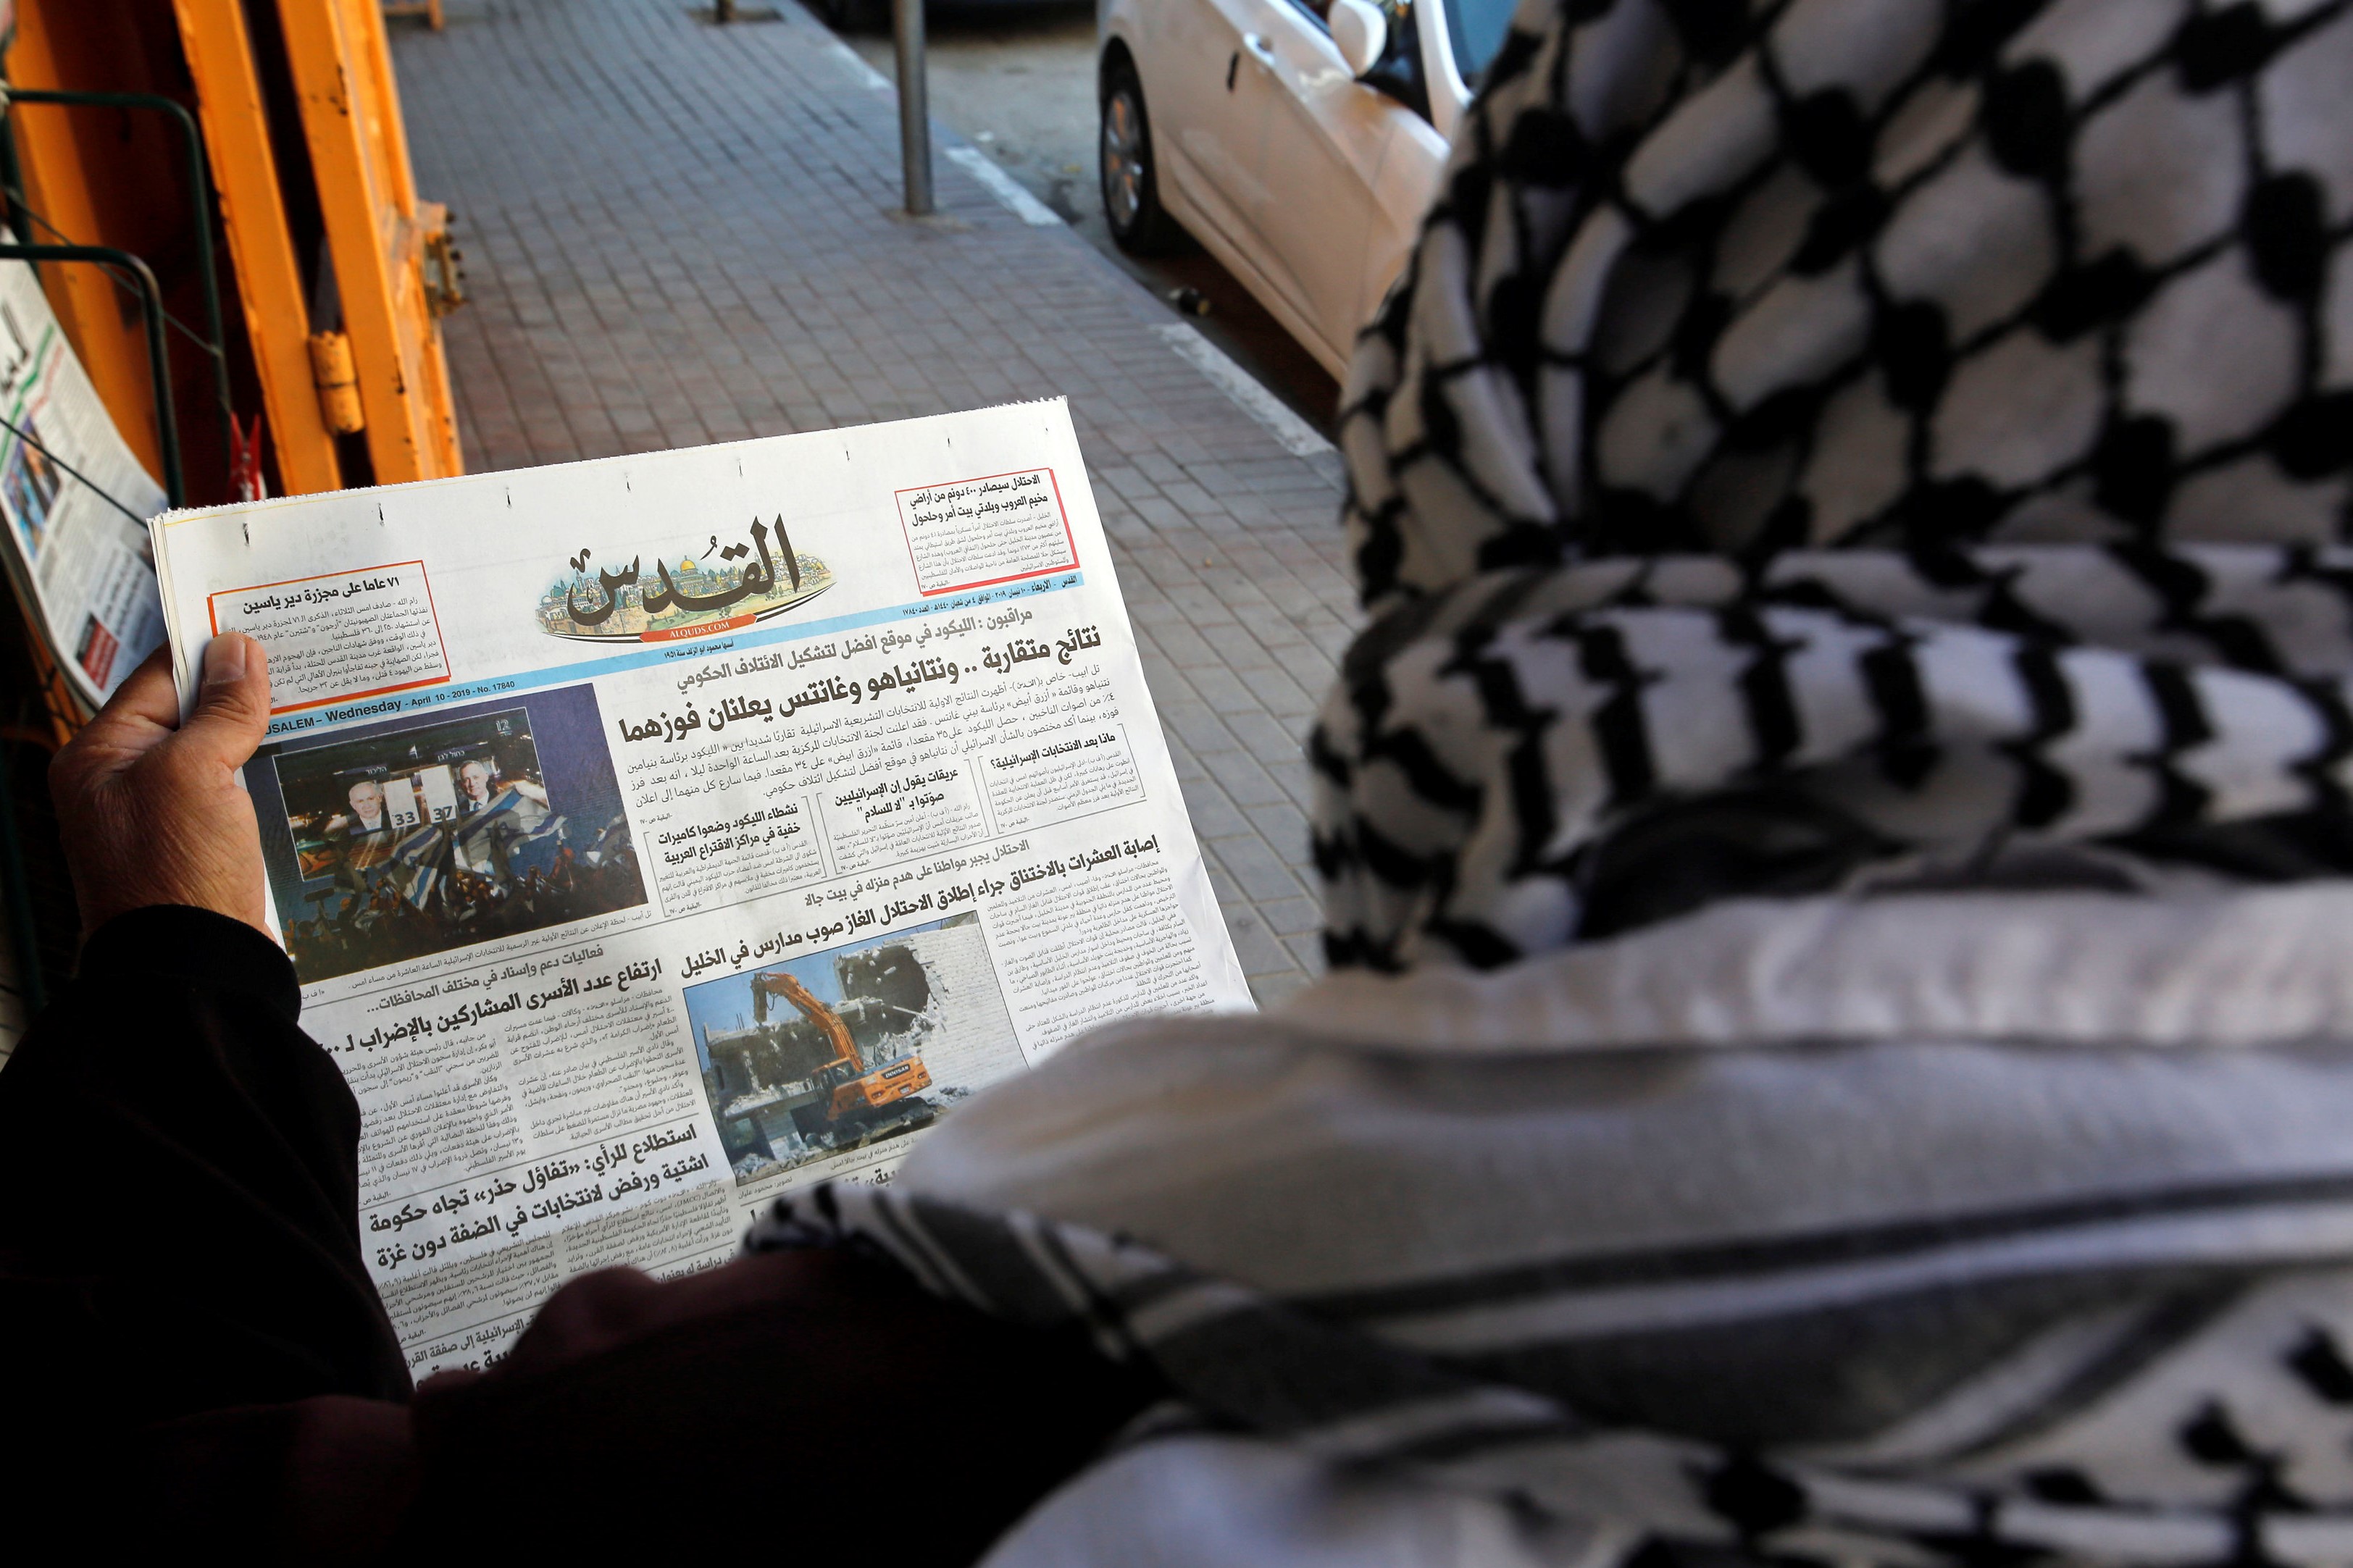 A Palestinian man reads a local newspaper with news of the Israeli election, in Hebron, in the Israeli-occupied West Bank on 10 April (REUTERS)